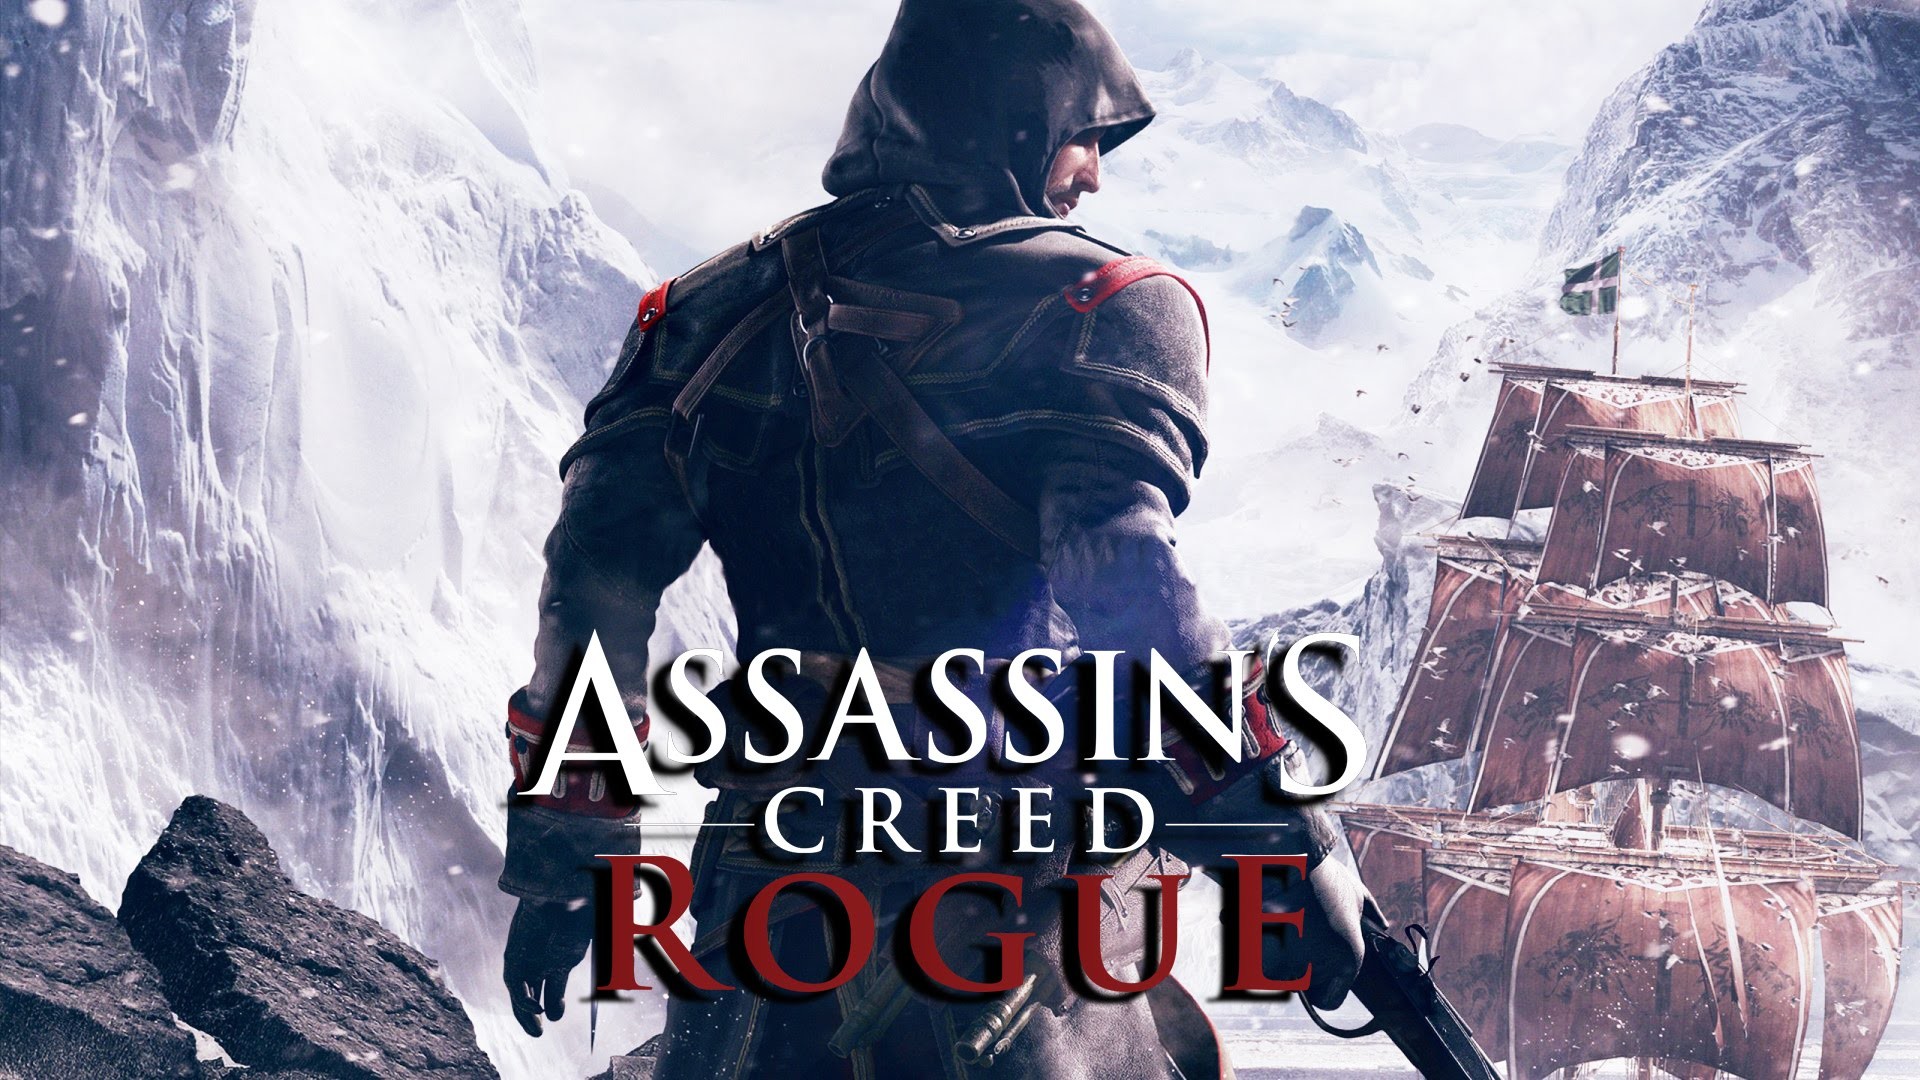 1920x1080 Assassin's Creed: Rogue PC All Cutscenes (Game Movie) 1080p HD - YouTube